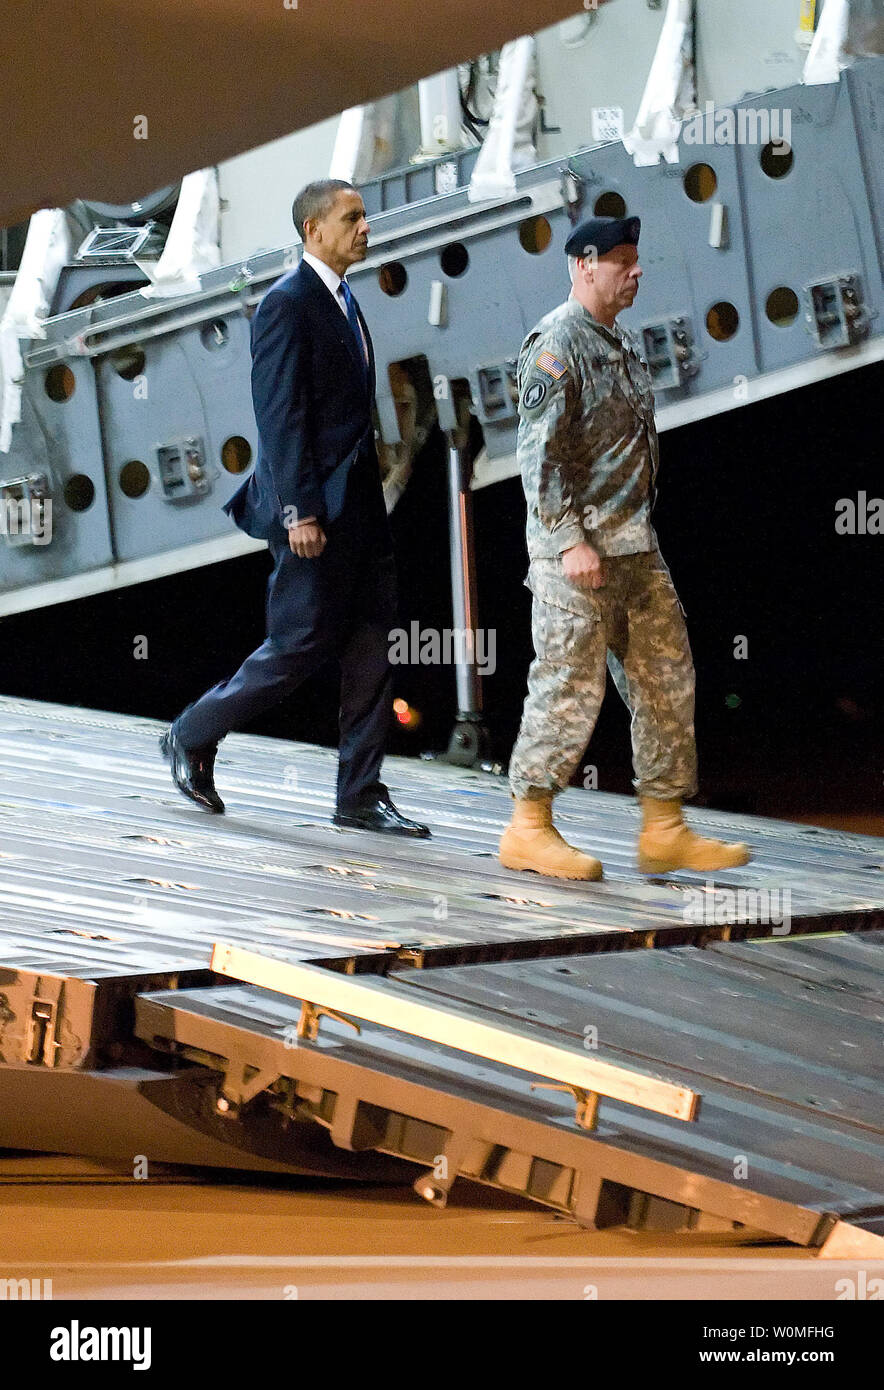 U.S. President Barack Obama and U.S. Army Maj. Gen. Daniel V. Wright exit a C-17 Globemaster III aircraft during the dignified transfer of Army Sgt. Dale R. Griffin at Dover Air Force Base, Delaware on October 29, 2009. Griffin, who was assigned to 1st Battalion, 17th Infantry Regiment, 5th Stryker Brigade Combat Team, 2nd Infantry Division, was killed in action on October 27, 2009, by a roadside bomb in the Kandahar province of Afghanistan. UPI/Jason Minto/U.S. Air Force Stock Photo